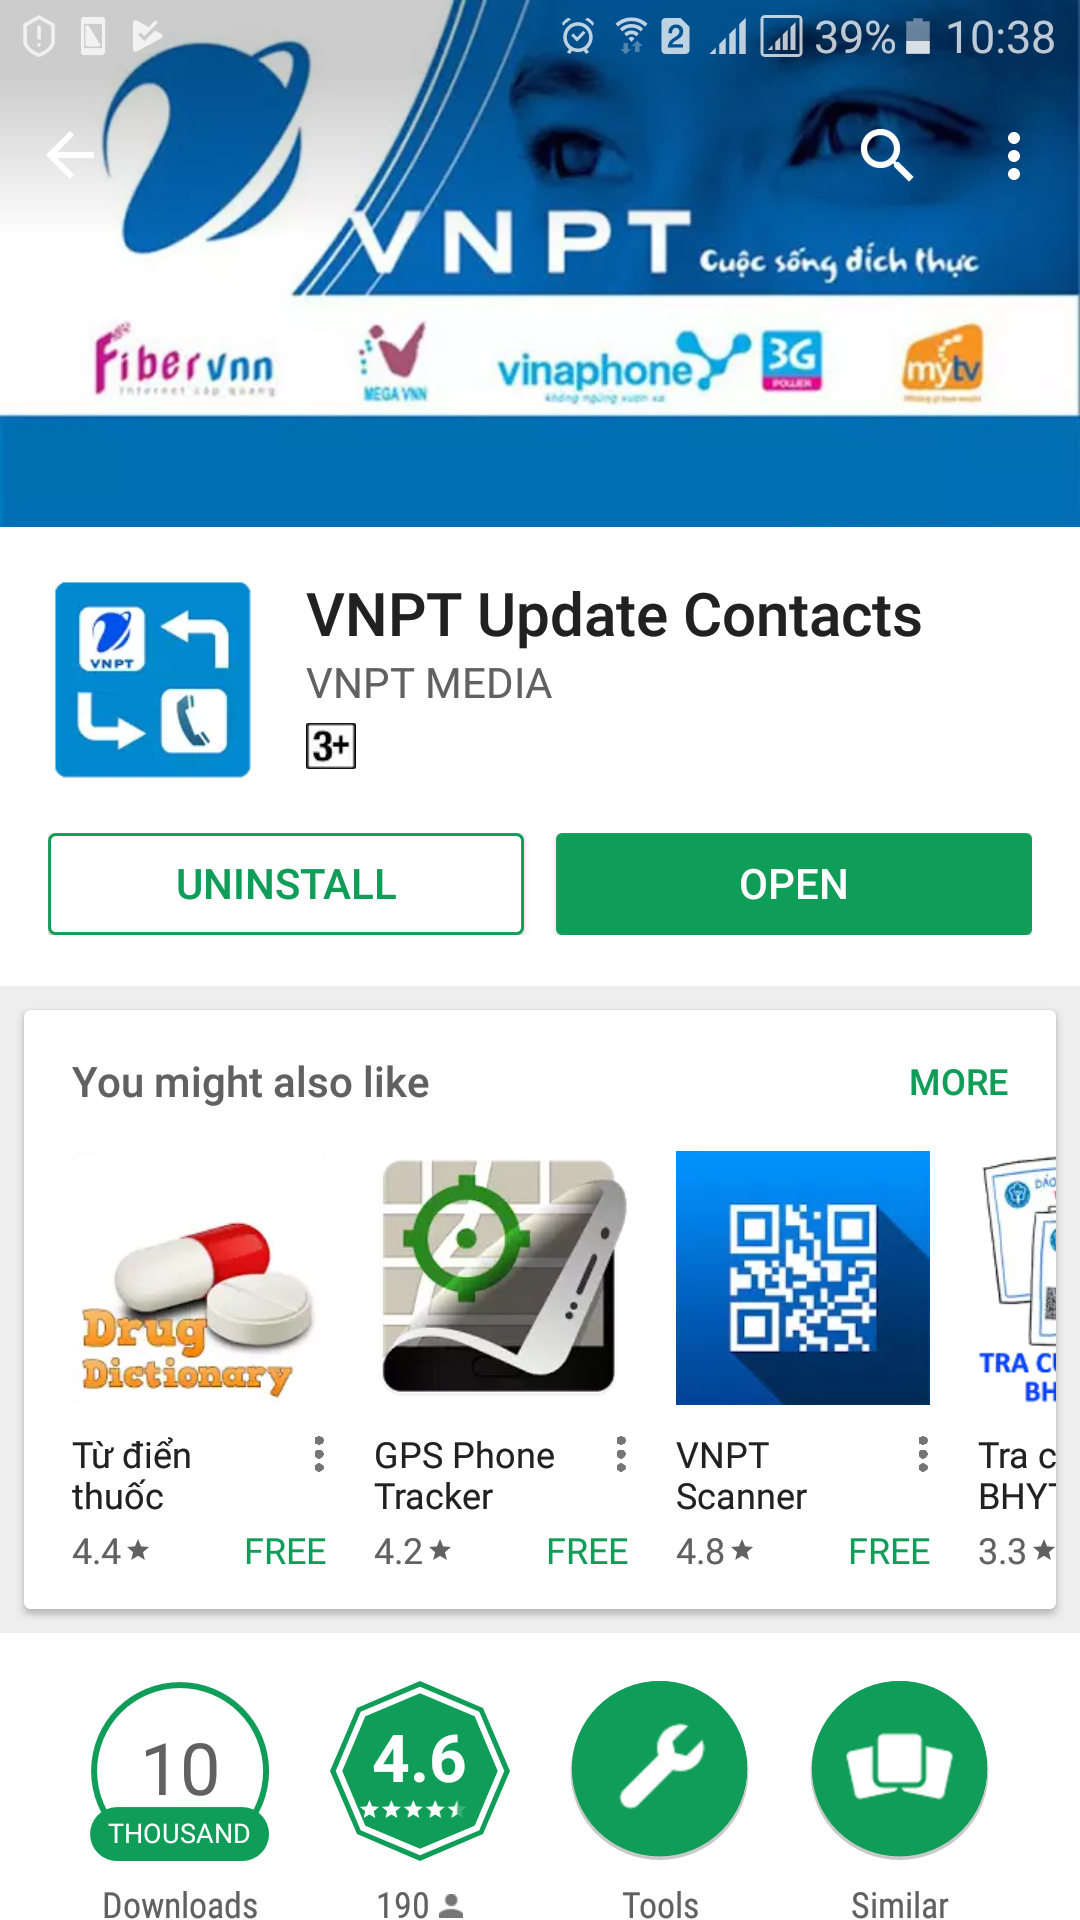 VNPT Update Contacts on Play Store